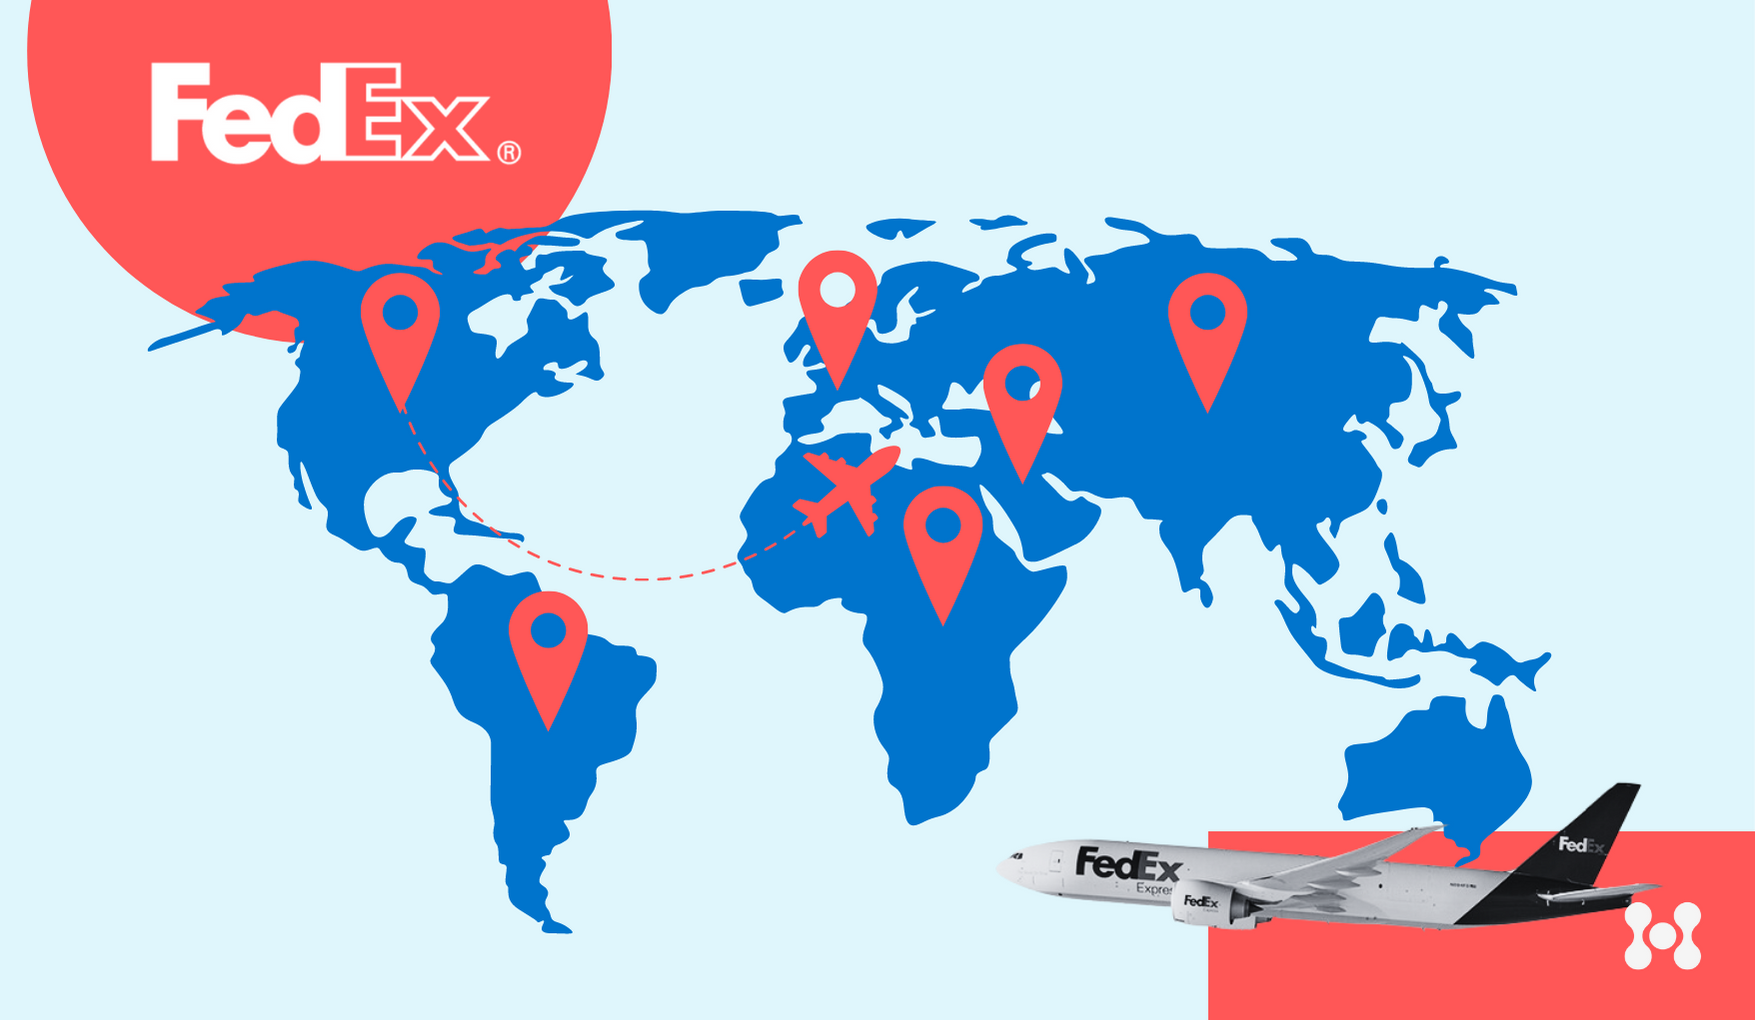 An outline of the continents is shown in a dark blue, while a fedex logo is displayed largely in the top left corner. The bottom right corner features the eHub logo. Over the continents, flight routes are displayed with large red waypoints, and a cutout of a fedex cargo plane is displayed. 